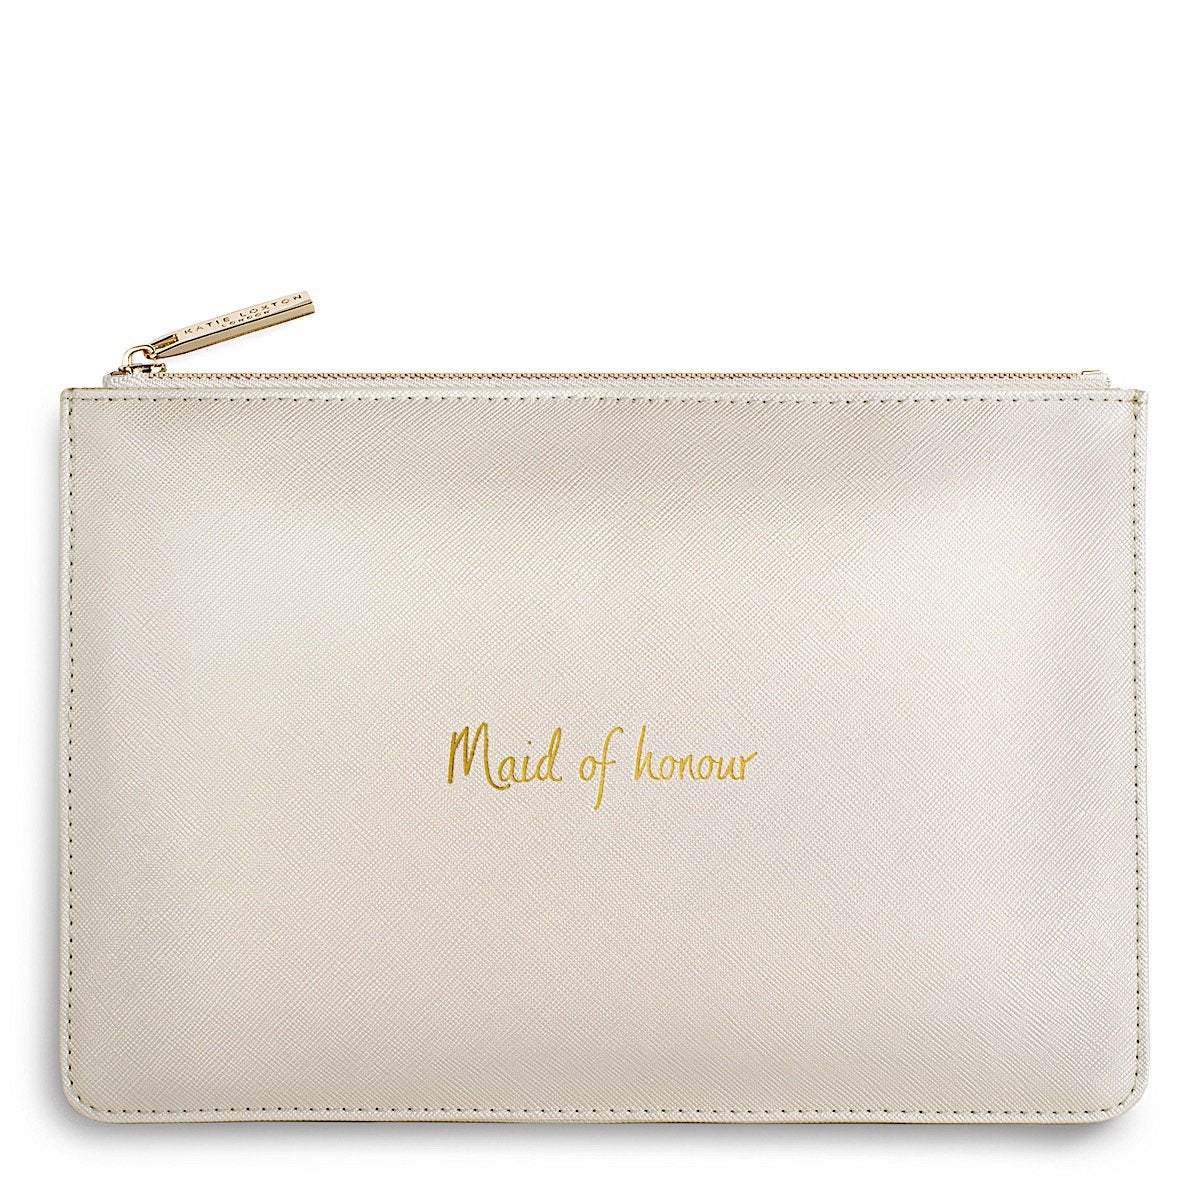 Load image into Gallery viewer, Katie Loxton Maid of Honour Bag - The Hen Planner
